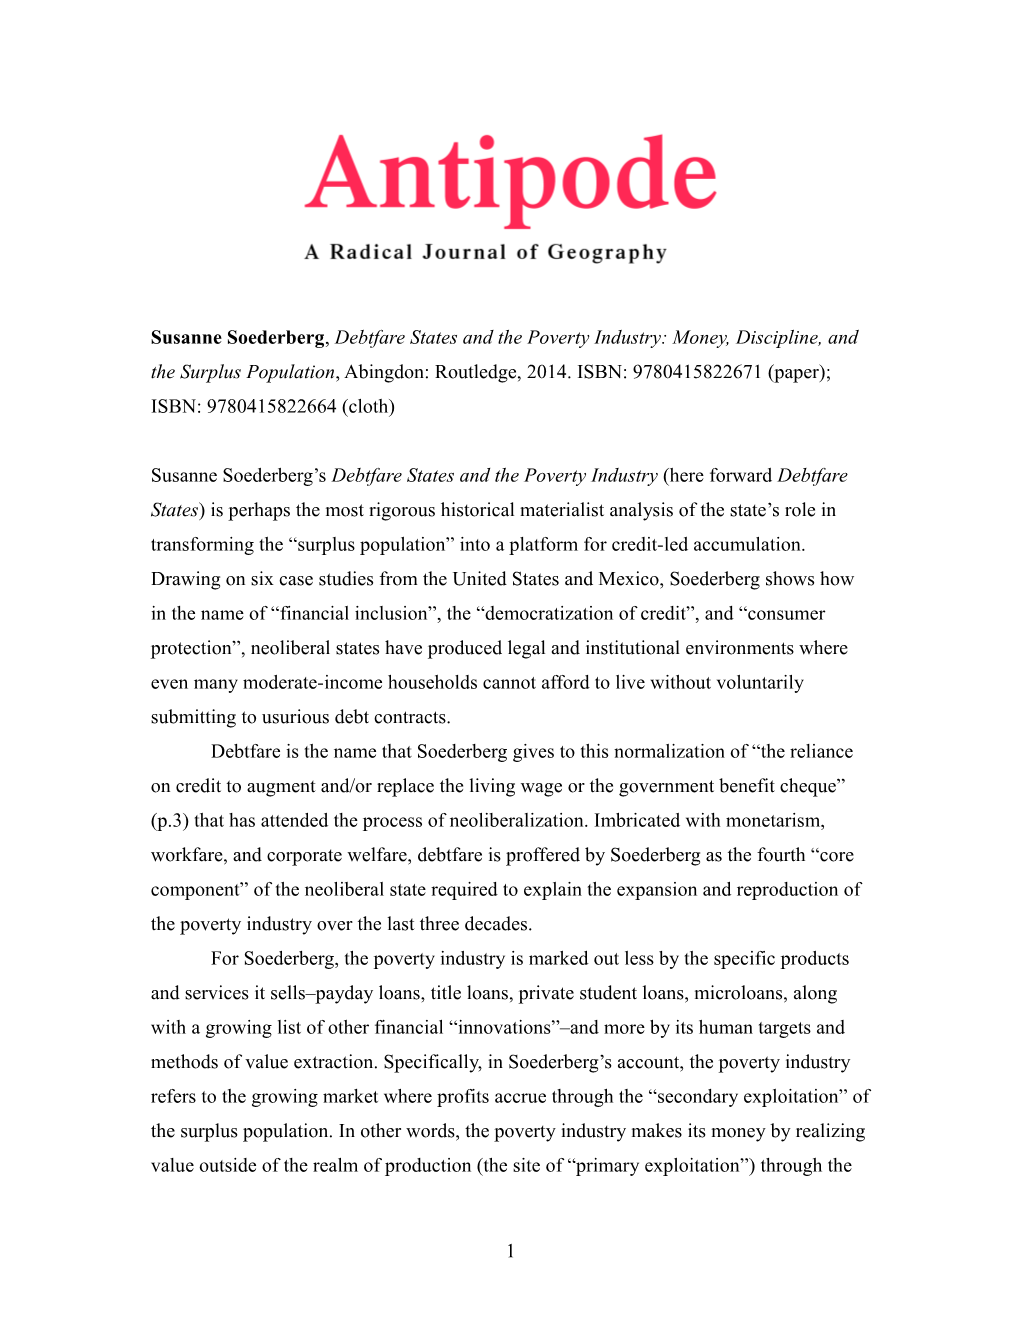 Susanne Soederberg, Debtfare States and the Poverty Industry: Money, Discipline, and the Surplus Population, Abingdon: Routledge, 2014